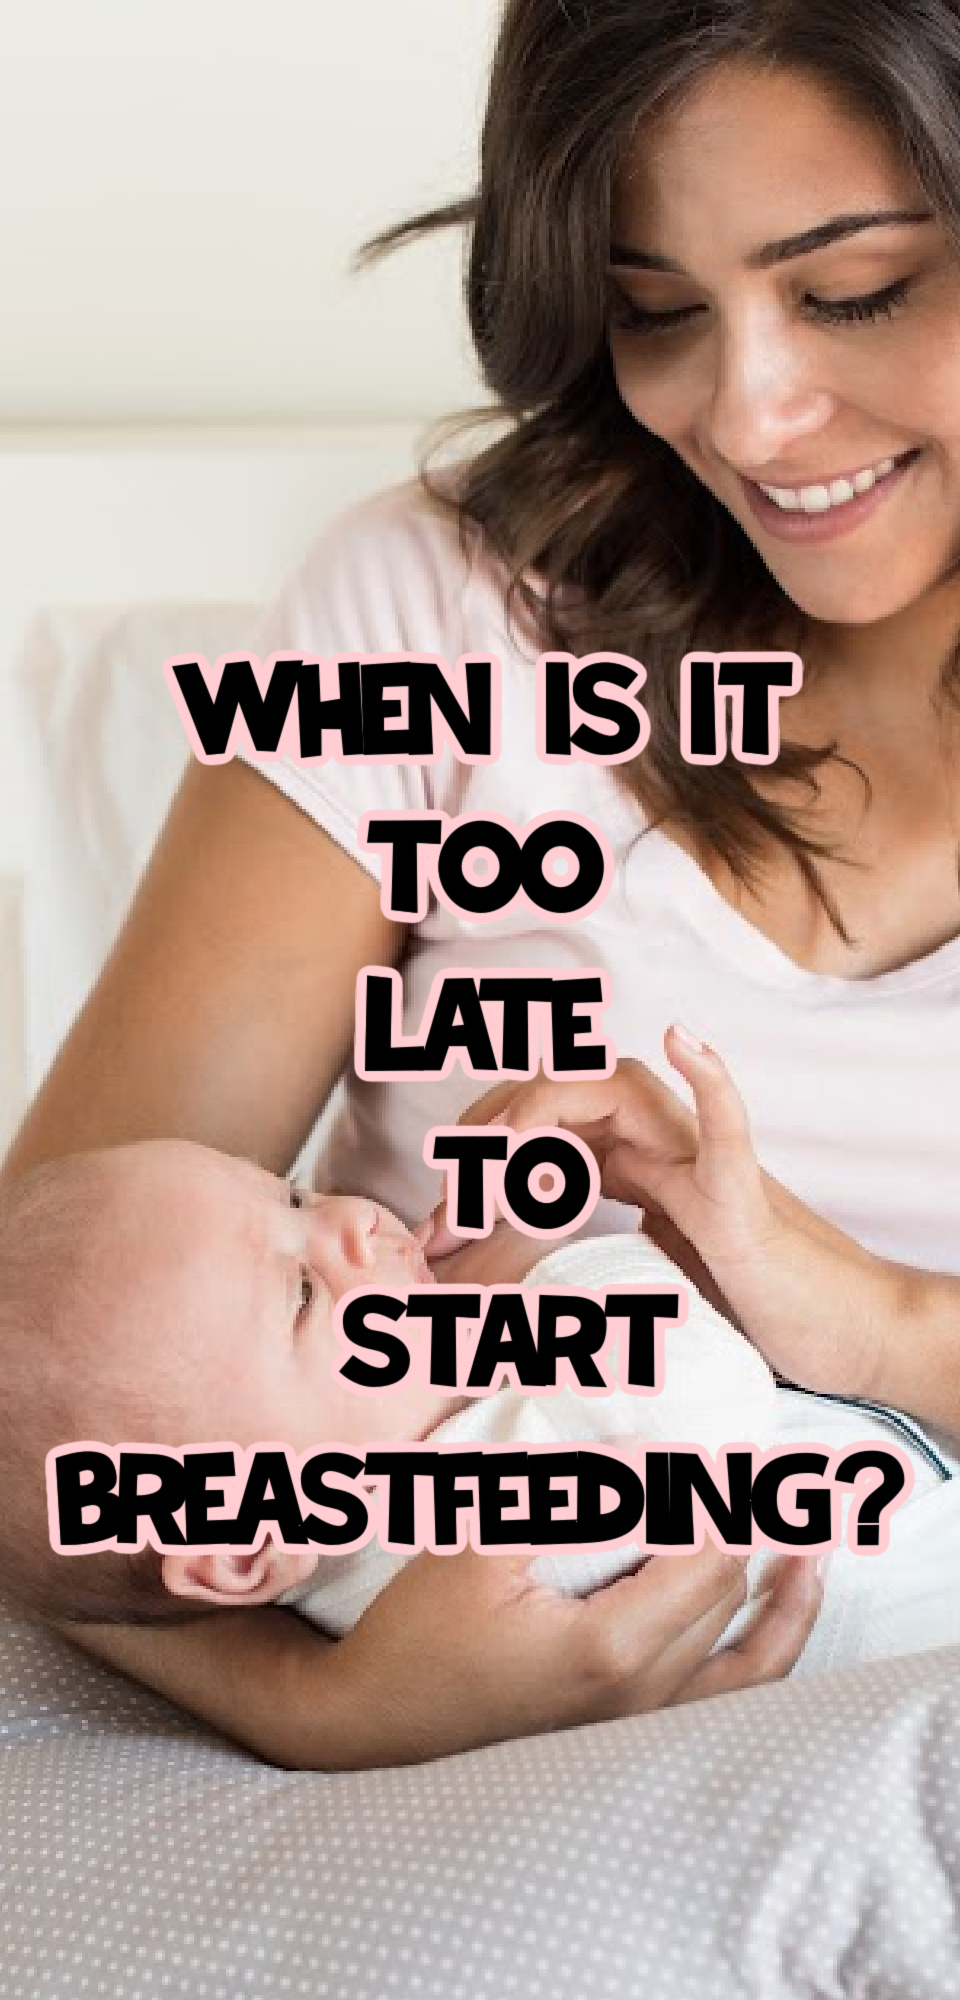 When Is It Too Late To Start Breastfeeding?